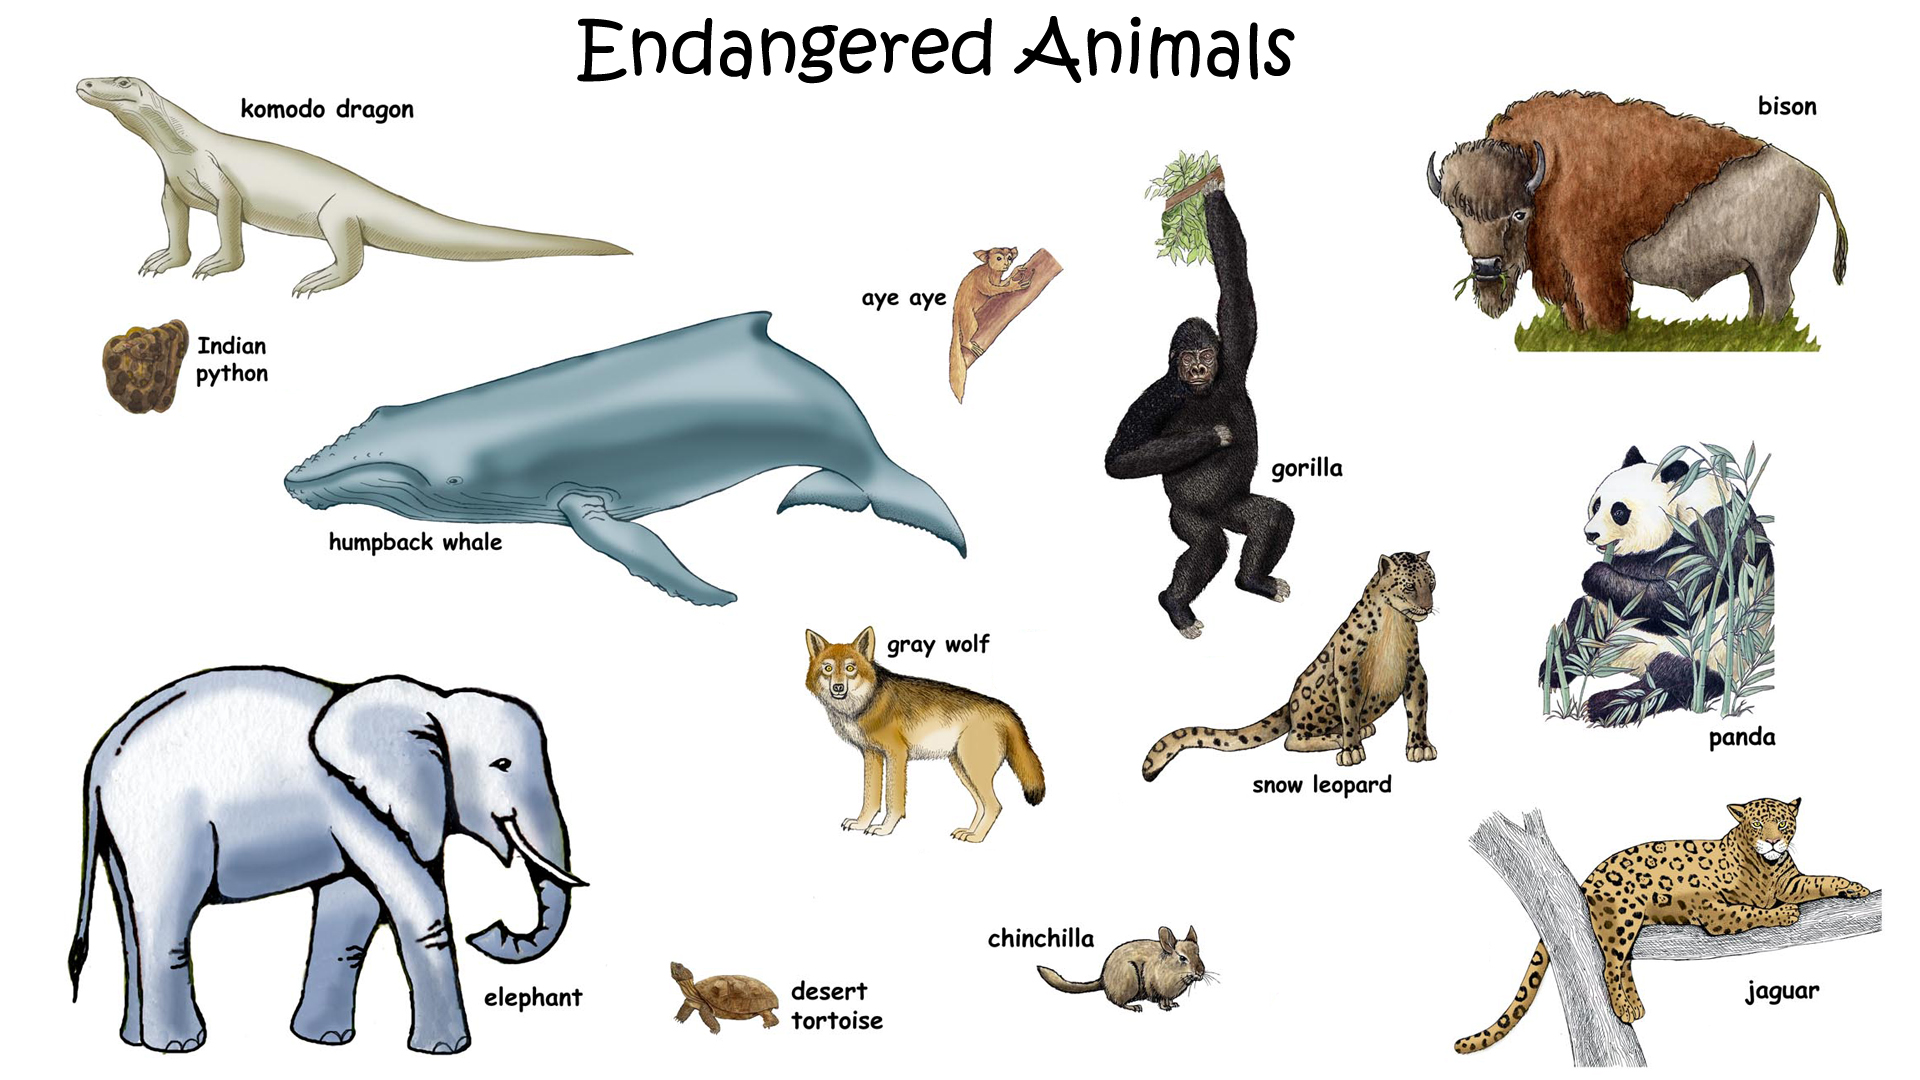 picture-of-endangered-animals-with-names-for-kids-hd-wallpapers